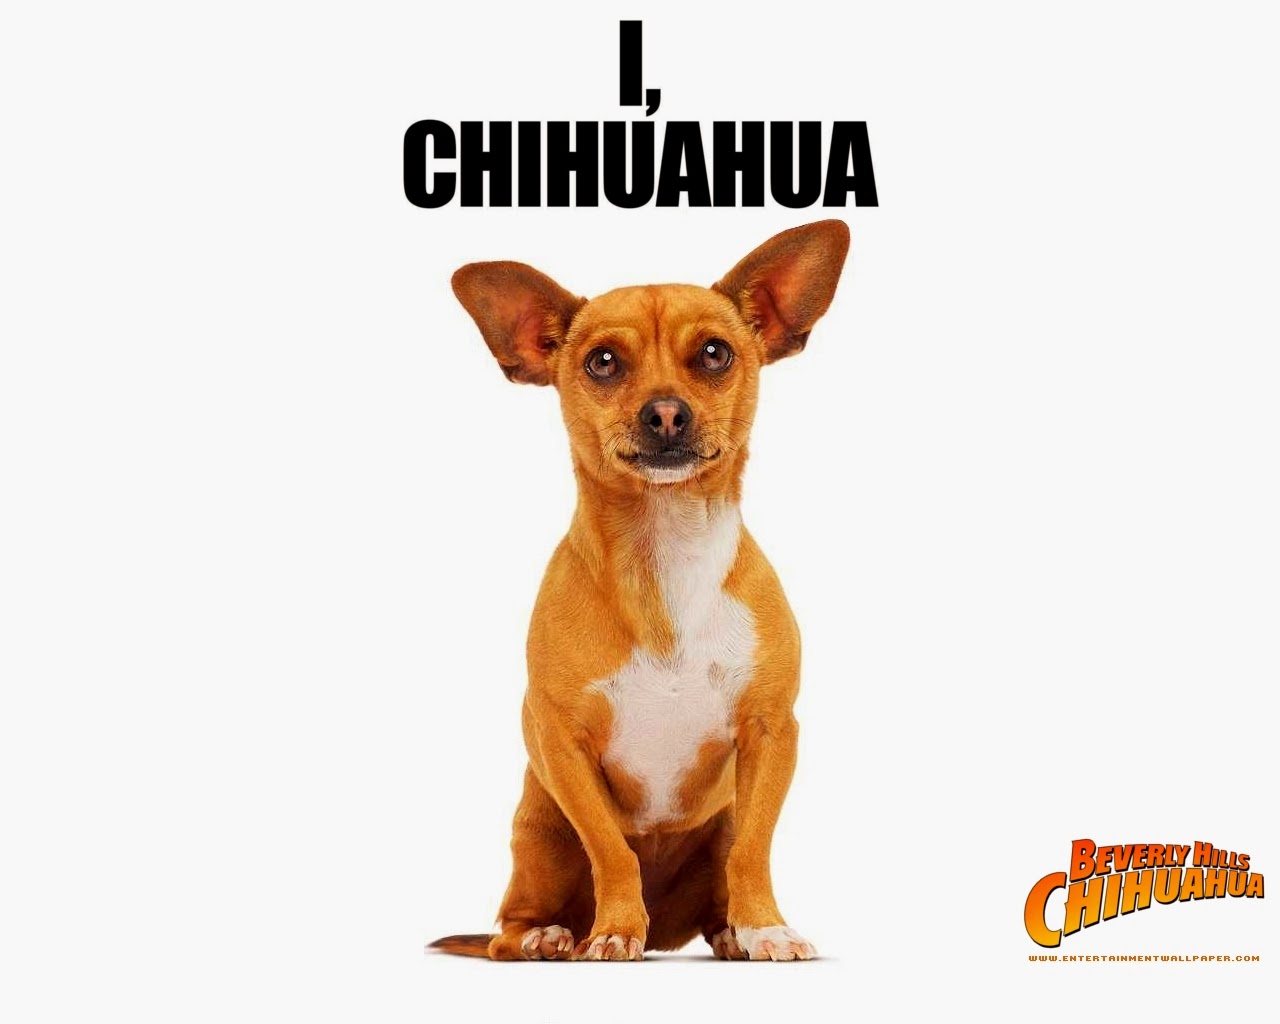 Animated Film Reviews: Beverly Hills Chihuahua (2008) Barking Good Family Comedy